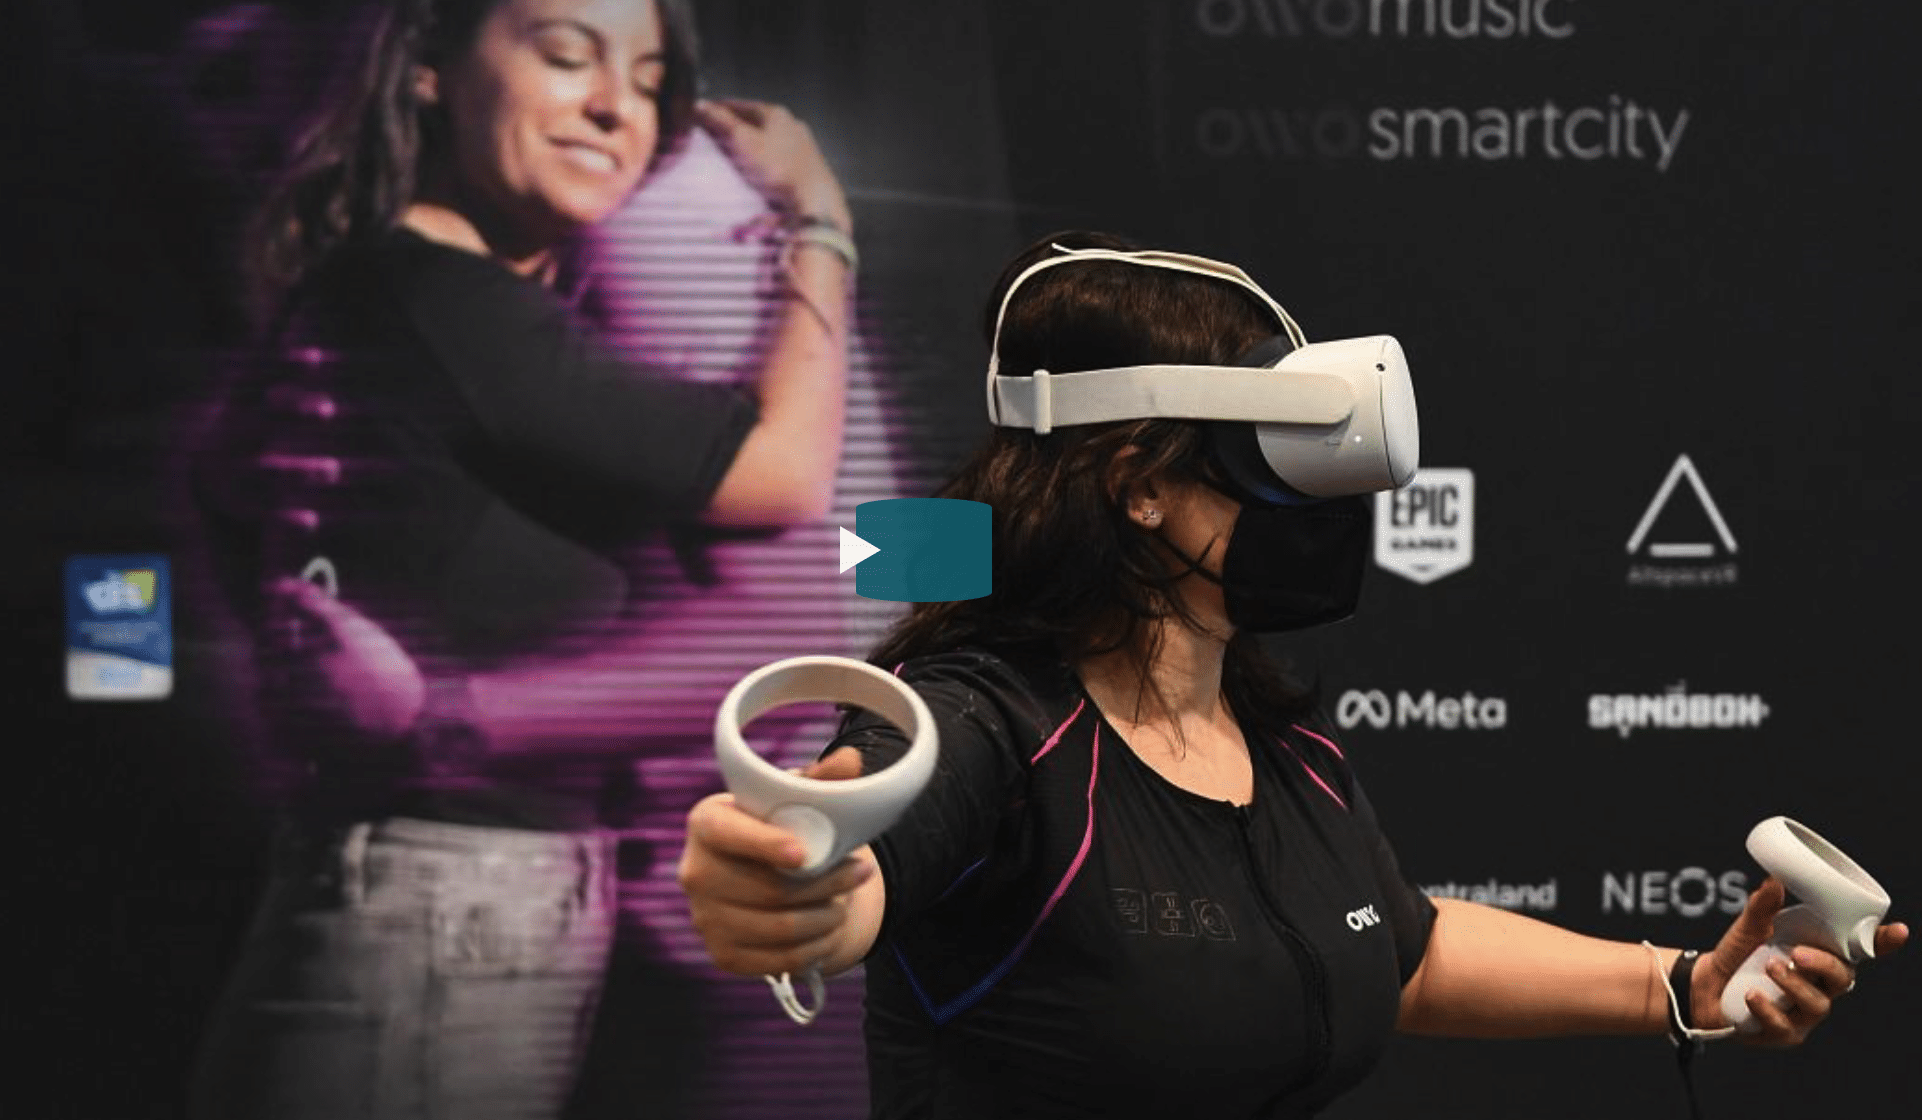 Future tech: Companies showcase their latest AR and VR tech at CES 2022